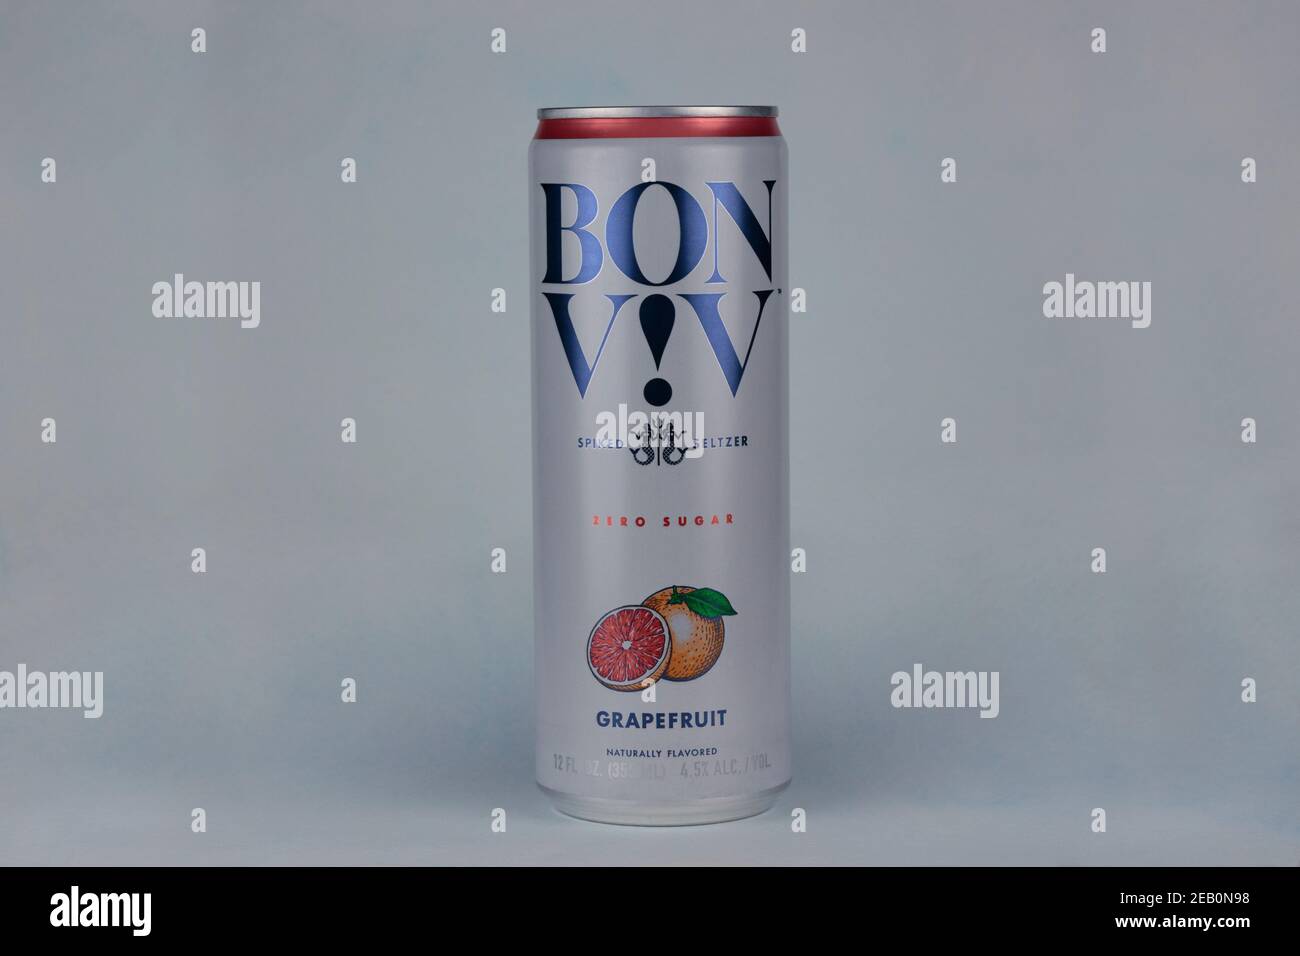 can of Bon Viv brand spiked seltzer, hard seltzer water with alcohol added, a popular beverage, on a pale blue background Stock Photo